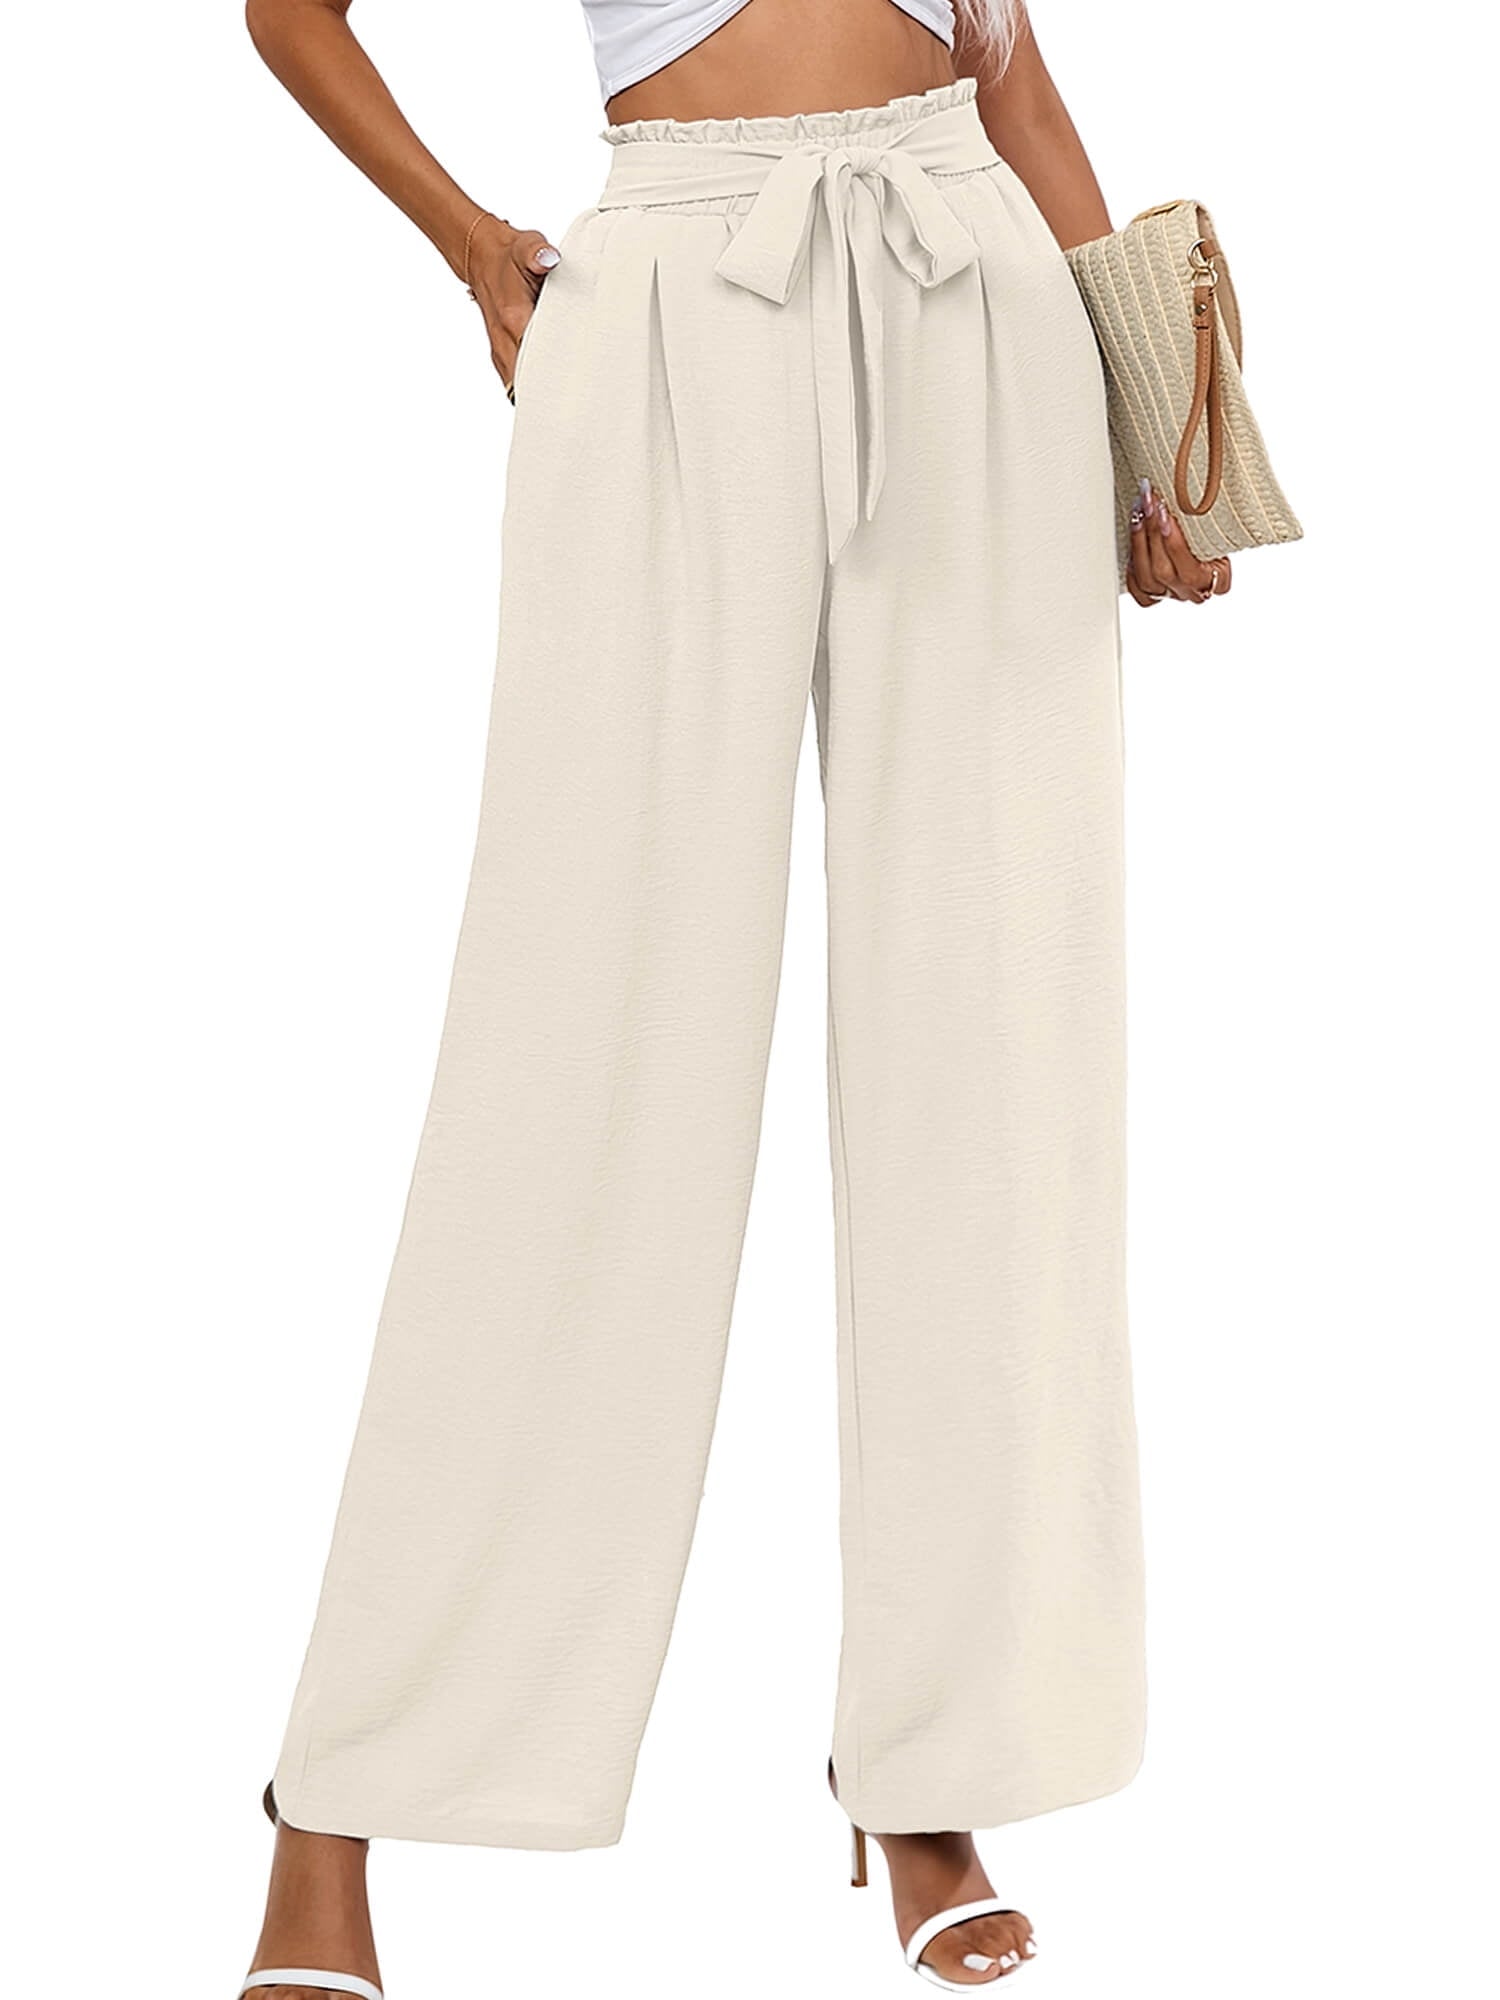 High Waist Wide Leg Palazzo Pants with Pockets with Loose Belt and